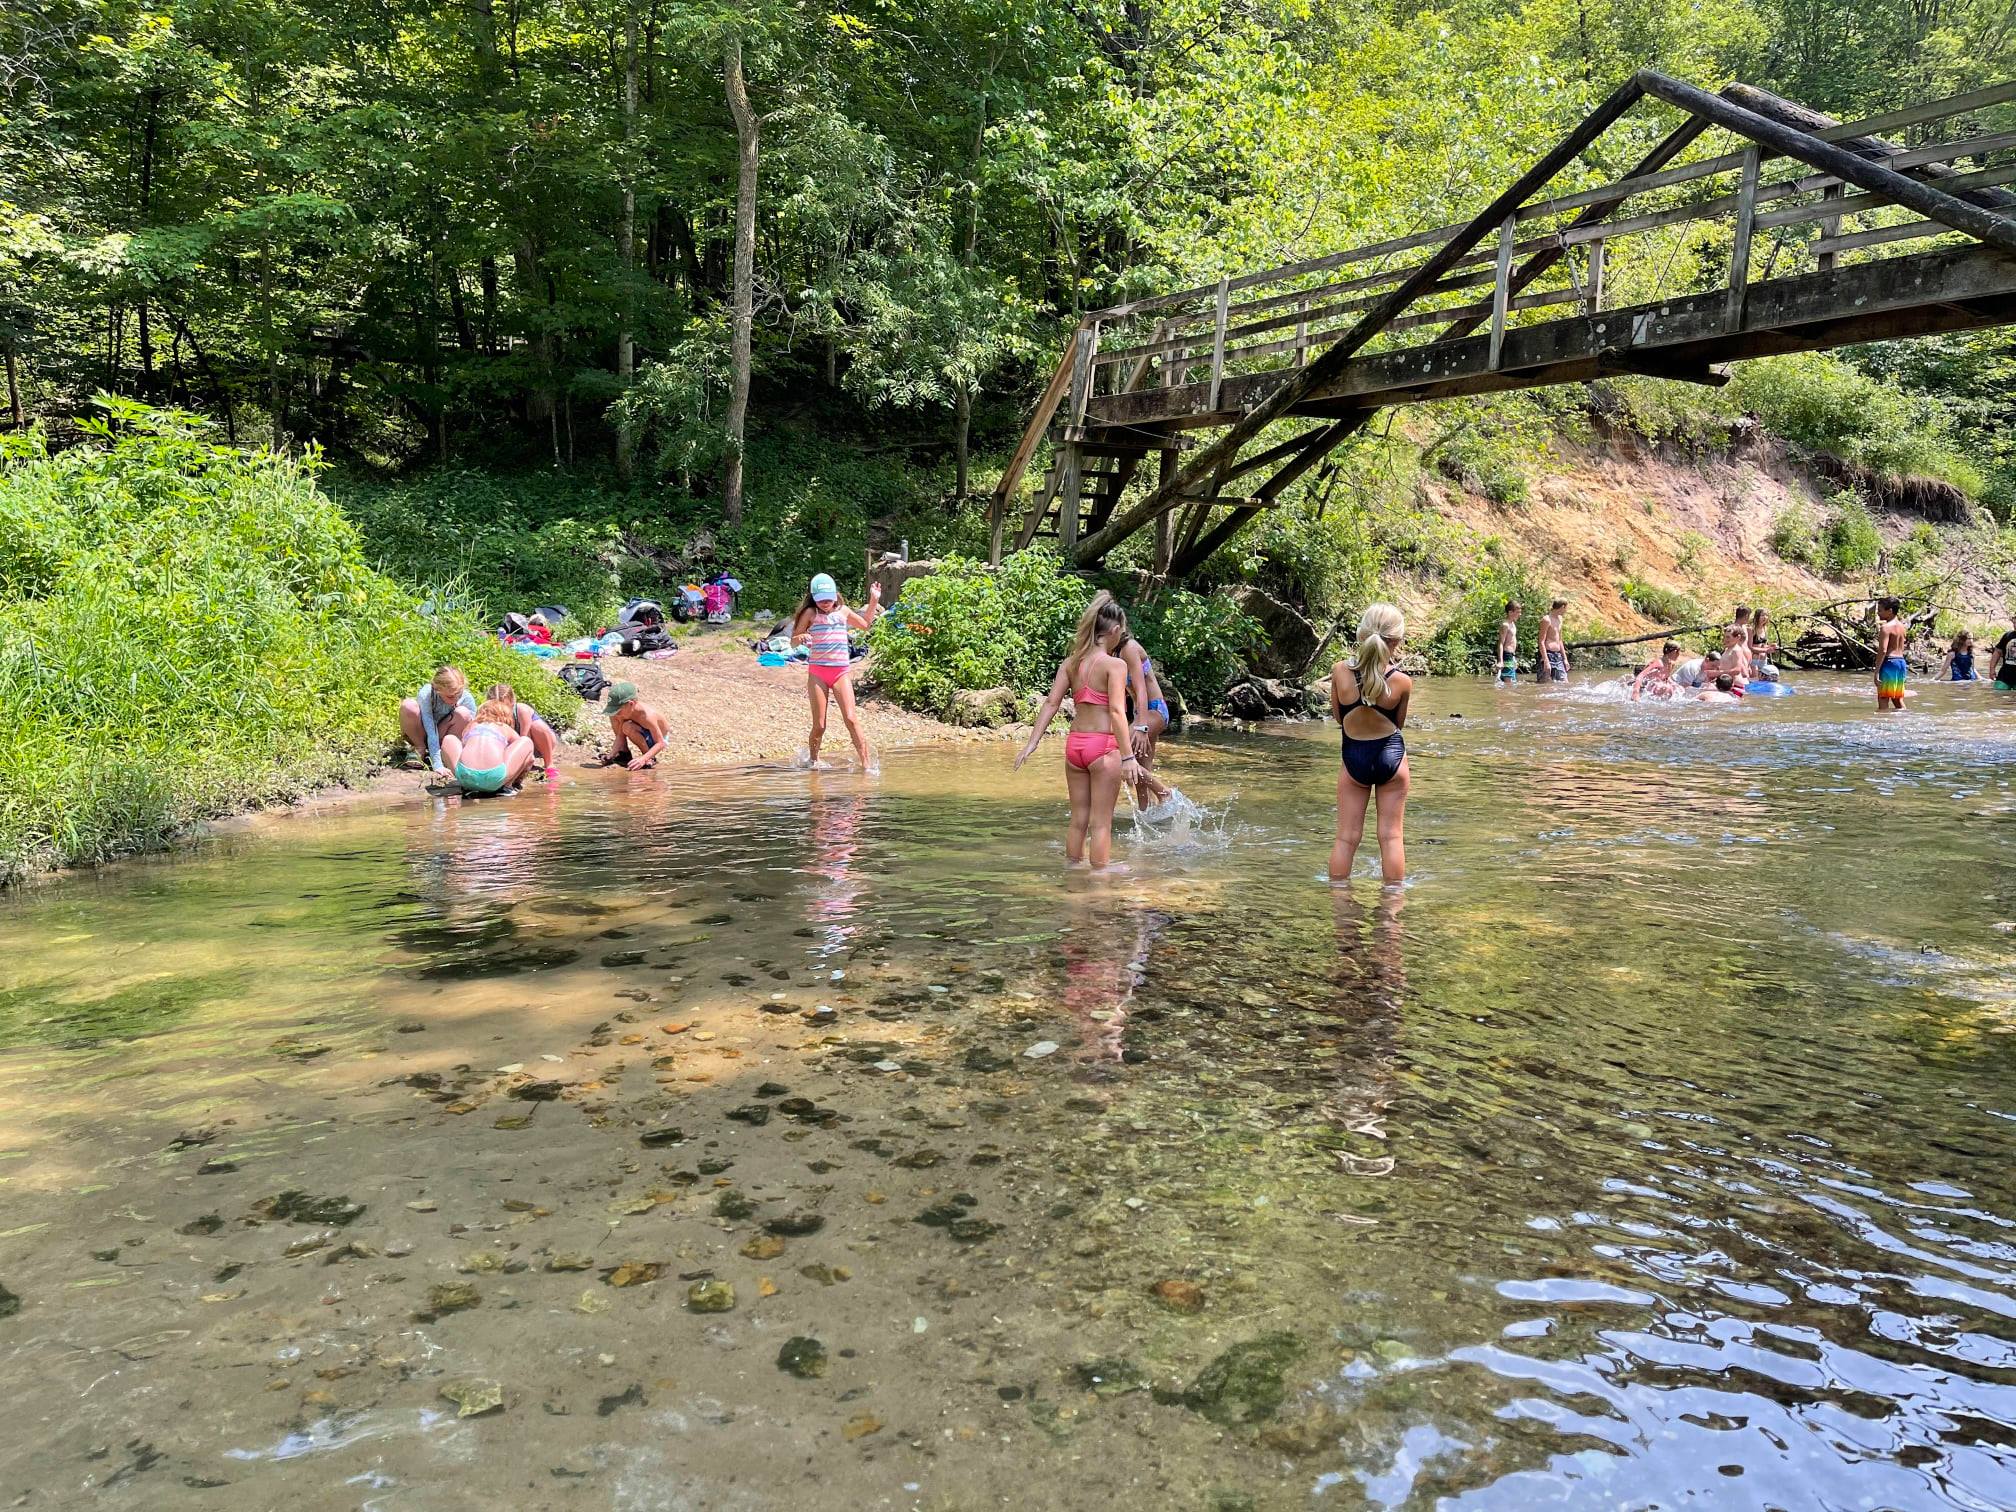 Campers playing in the river underneath the A-Frame Bridge.